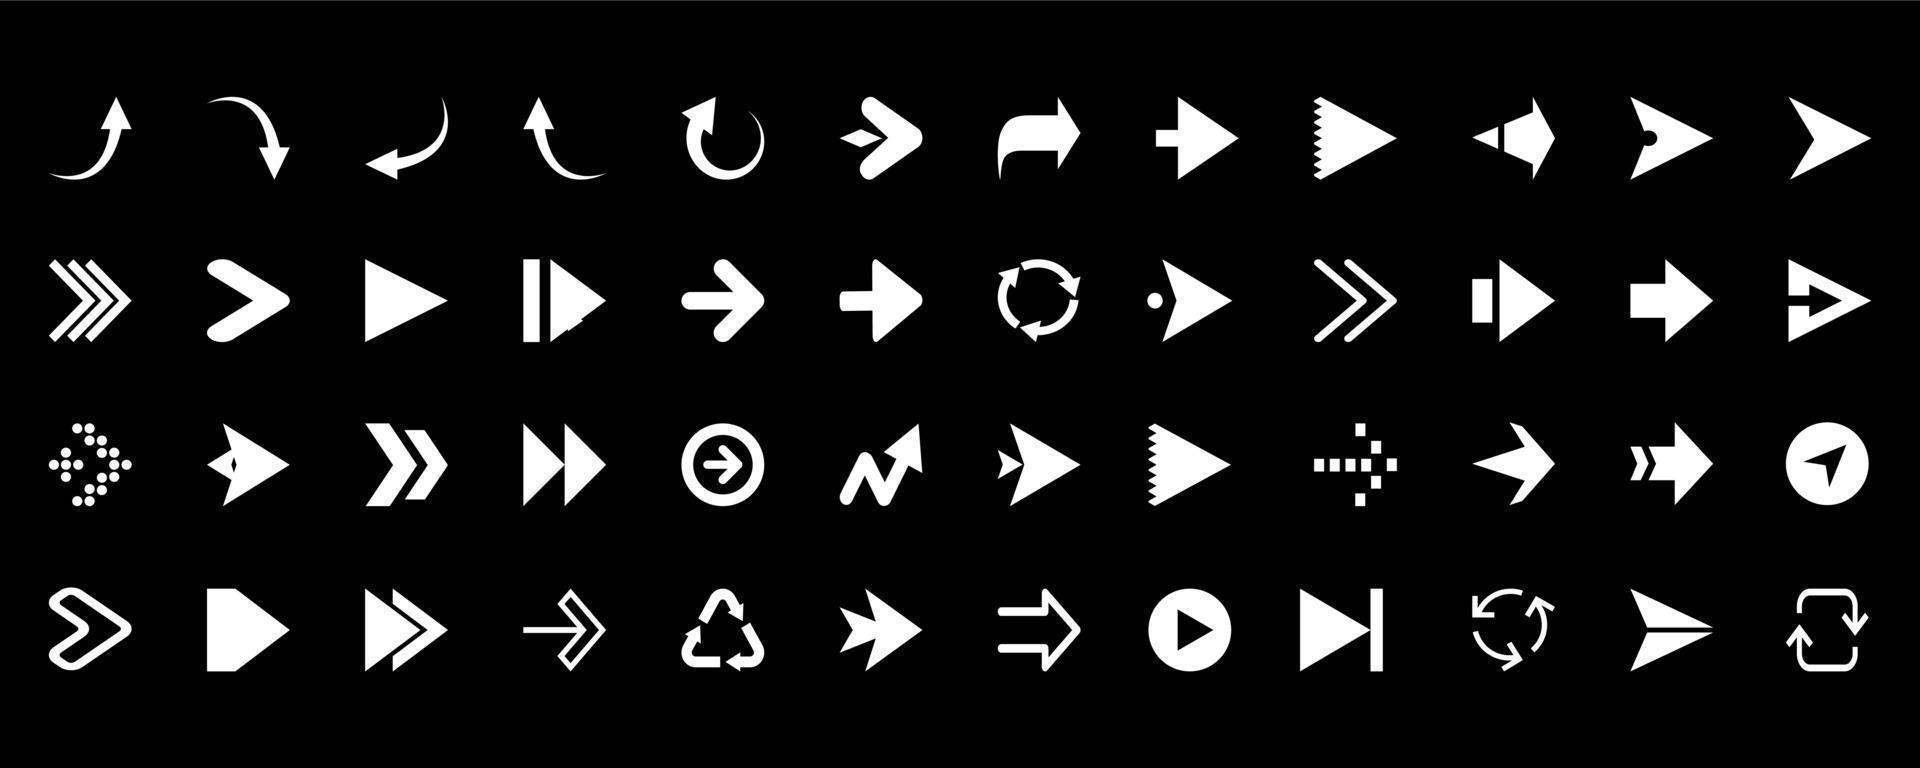 collection of arrow directions with various shapes vector